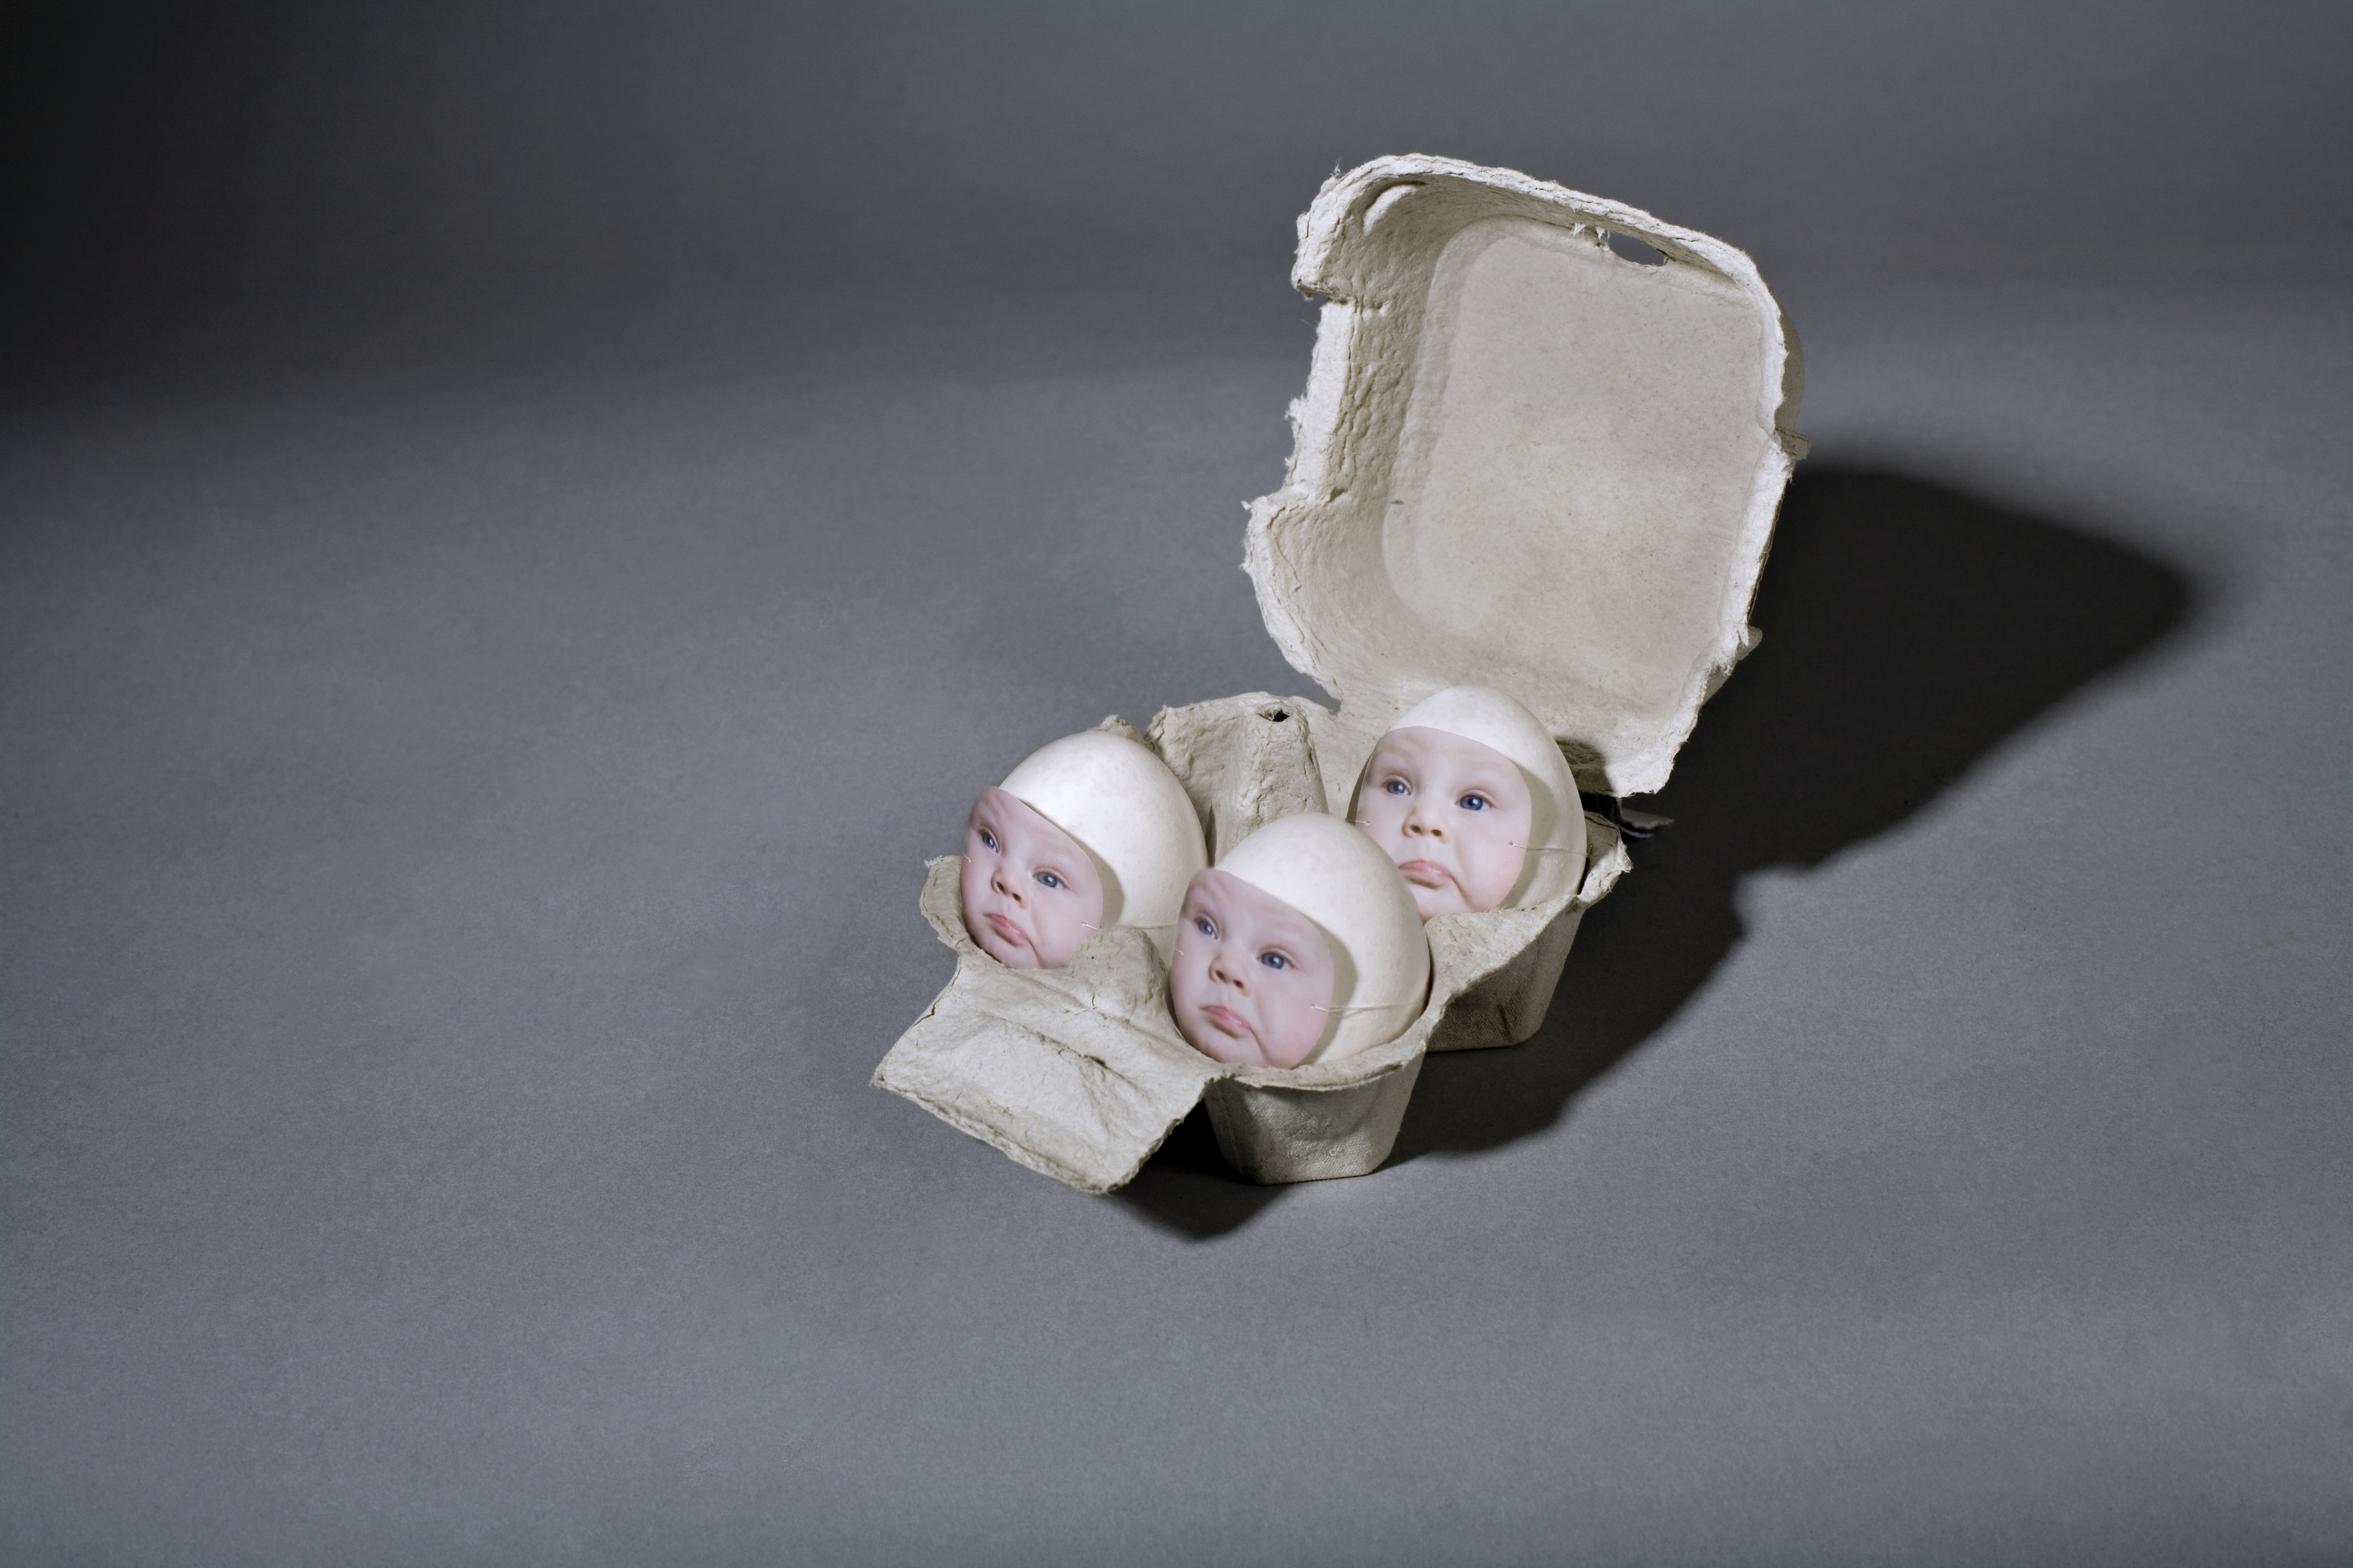 Sculptural art of three baby faces on eggshells in a small carton on a plain background